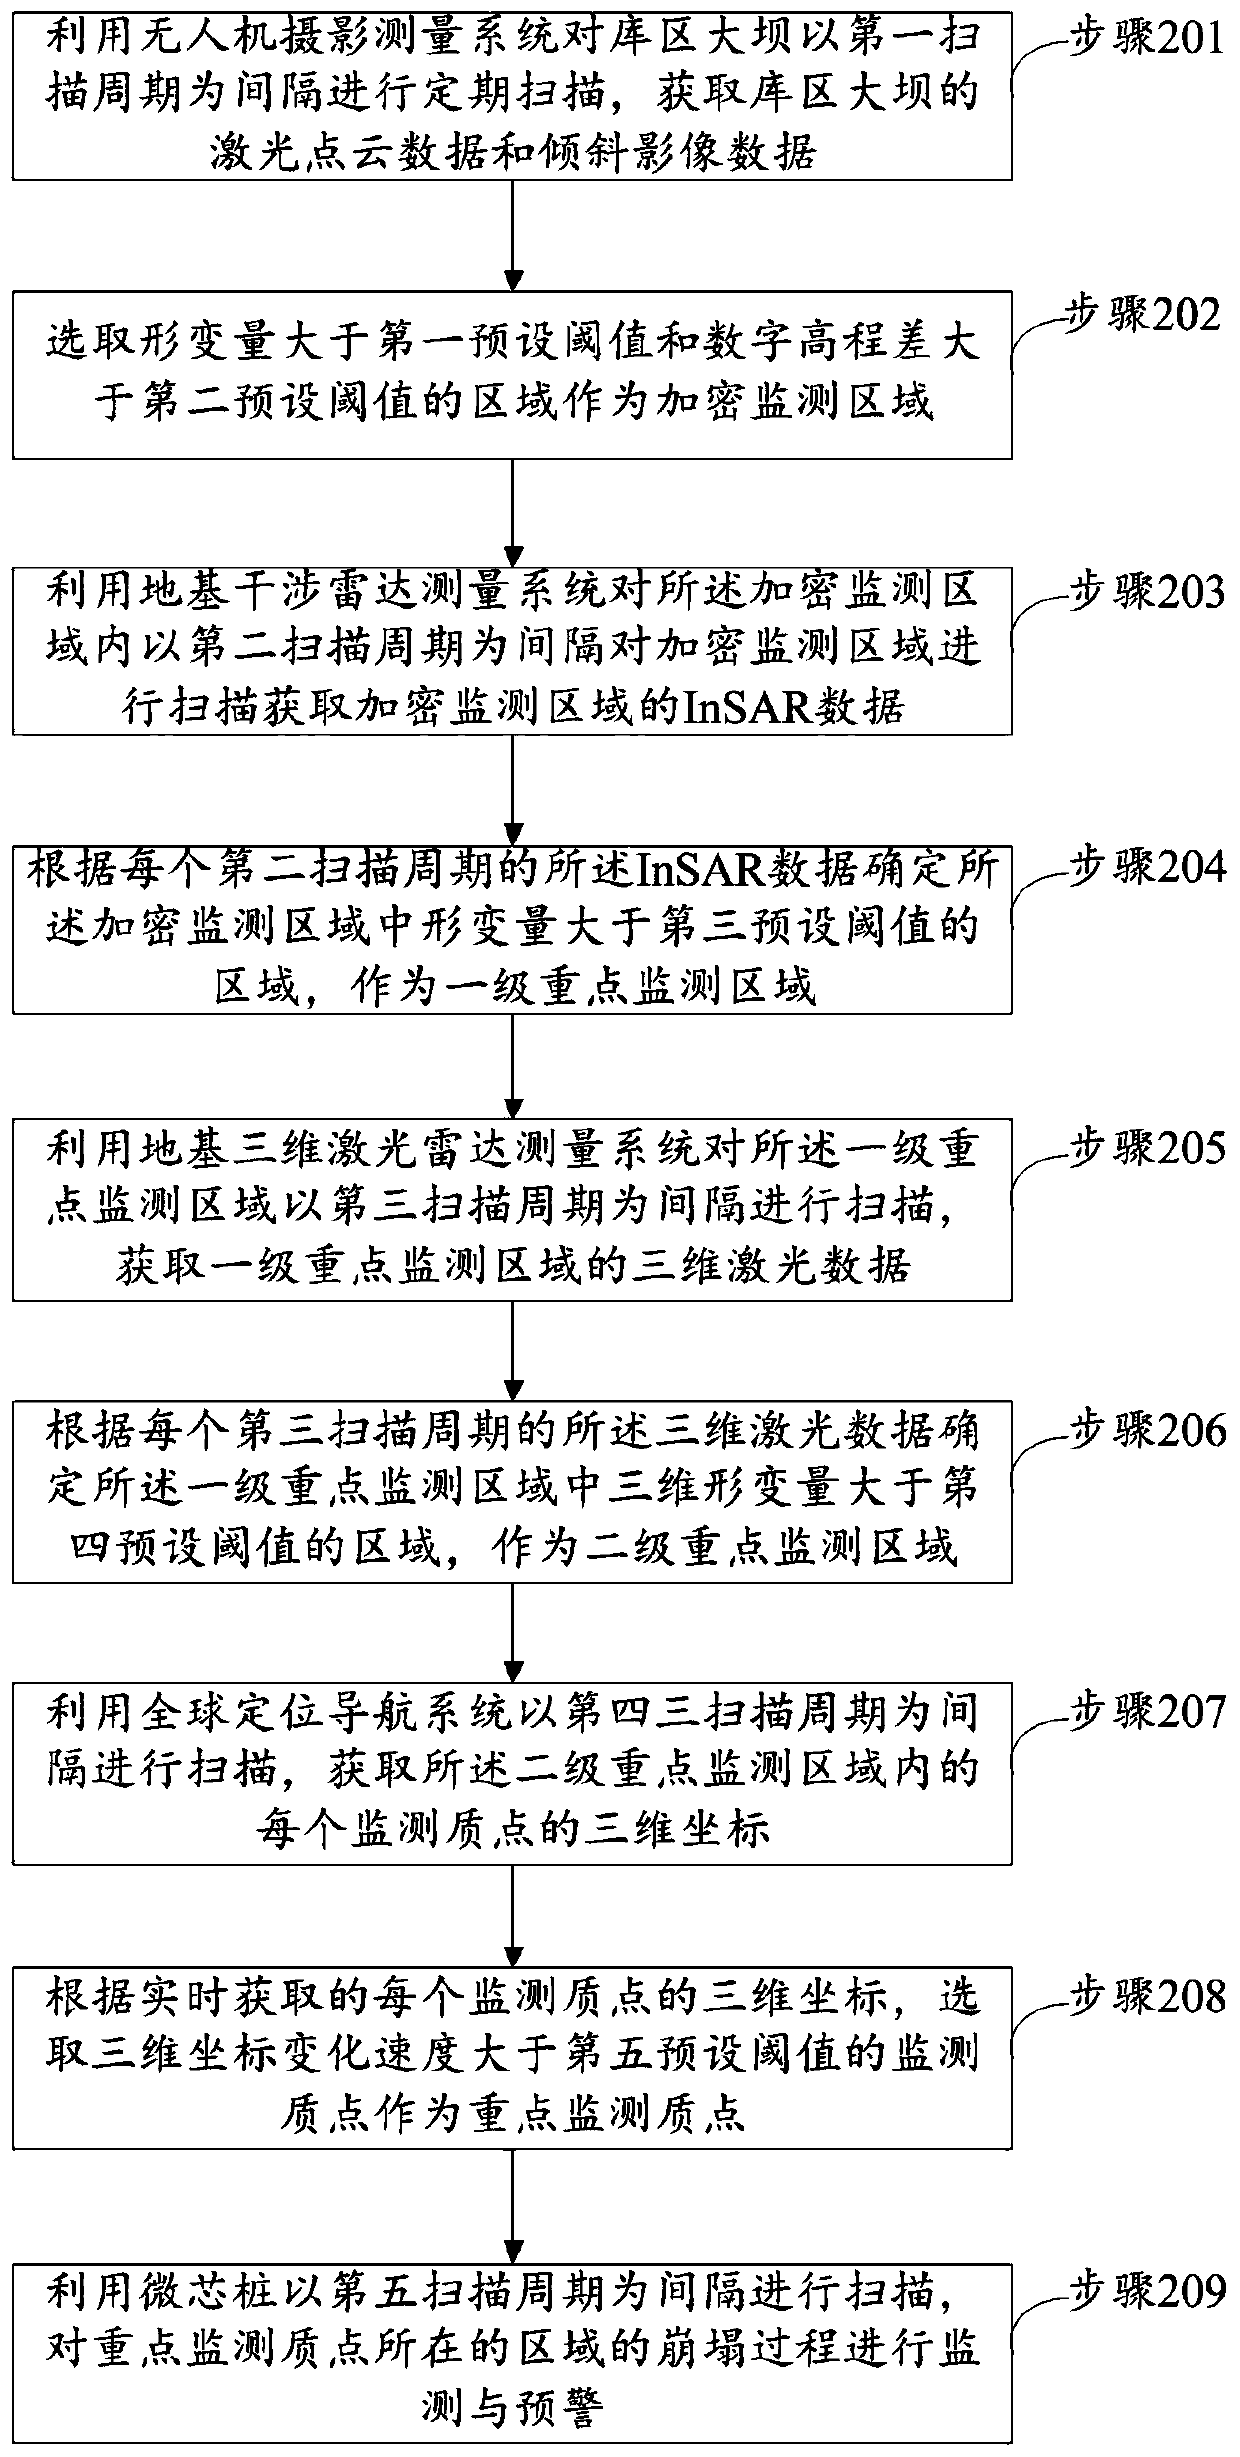 Dam slope deformation monitoring system and method